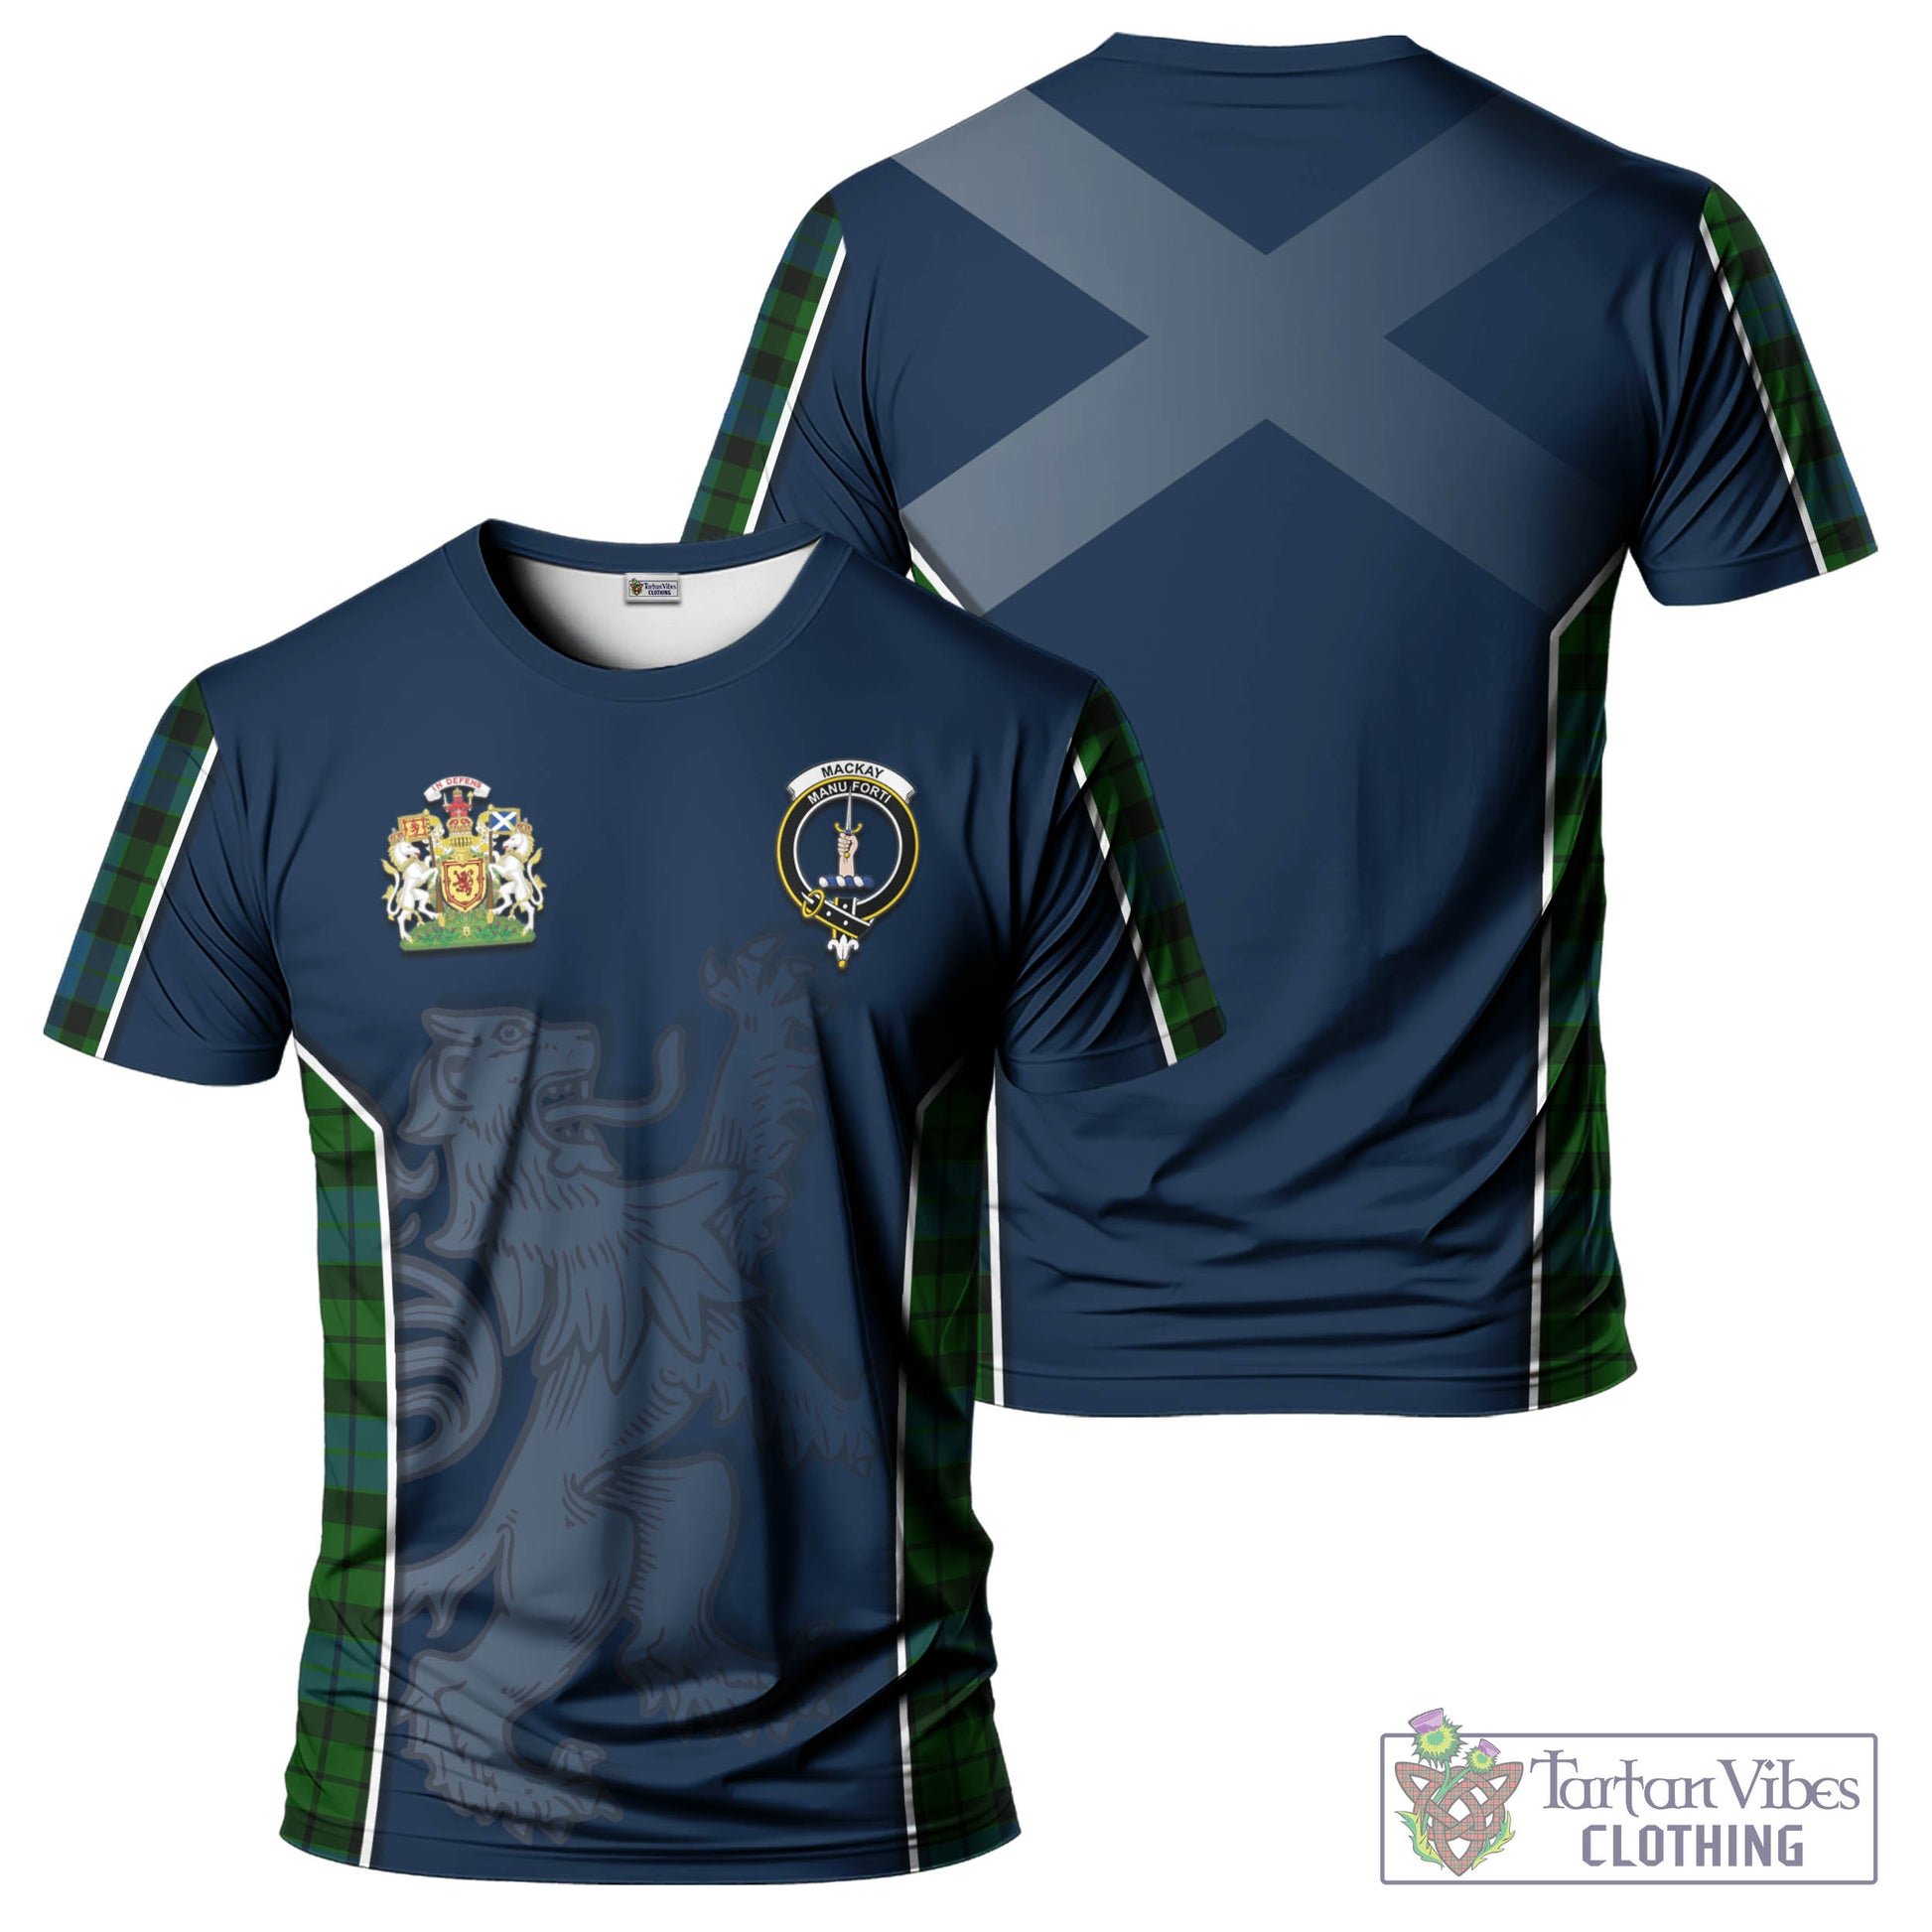 Tartan Vibes Clothing MacKay Modern Tartan T-Shirt with Family Crest and Lion Rampant Vibes Sport Style